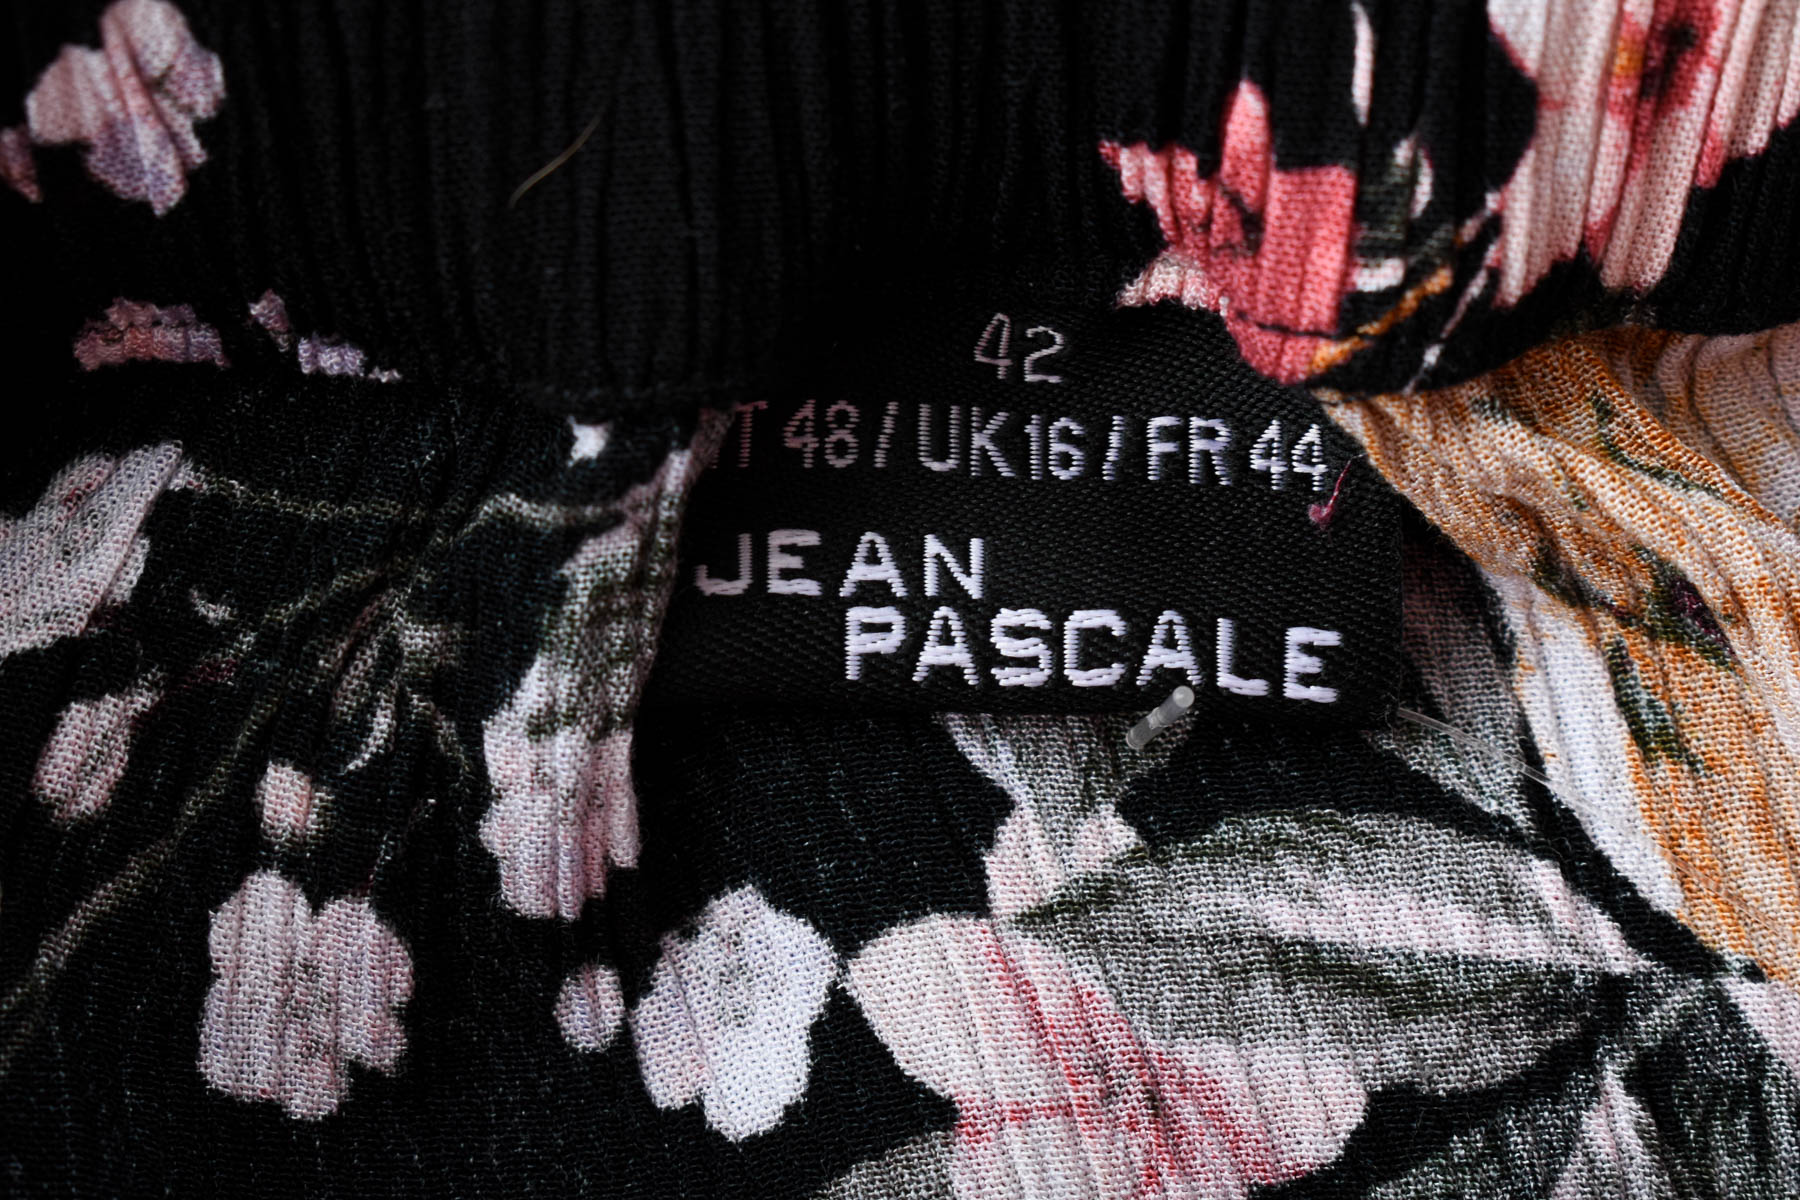 Skirt - Jean Pascale - 2